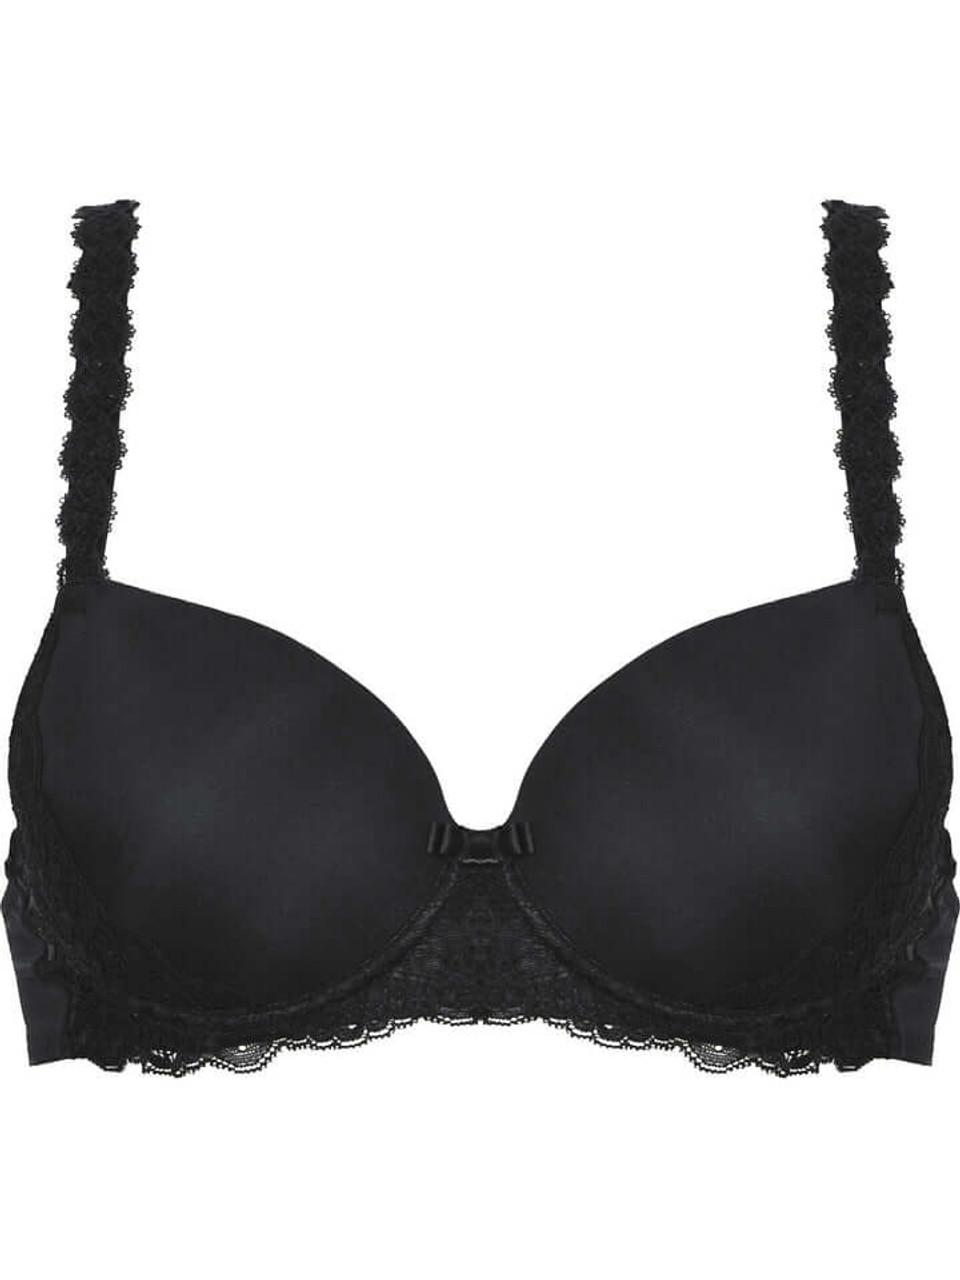 Essentials868 - Non PADDED FULL LACE BRA ✓HAS UNDERWIRE ✓Lace detail at the  side and Cup ✓2 Hook back enclosure ✓90% Polyamide 10 % Spandex Sizes: 32B  34C 38B 38C 40C Price